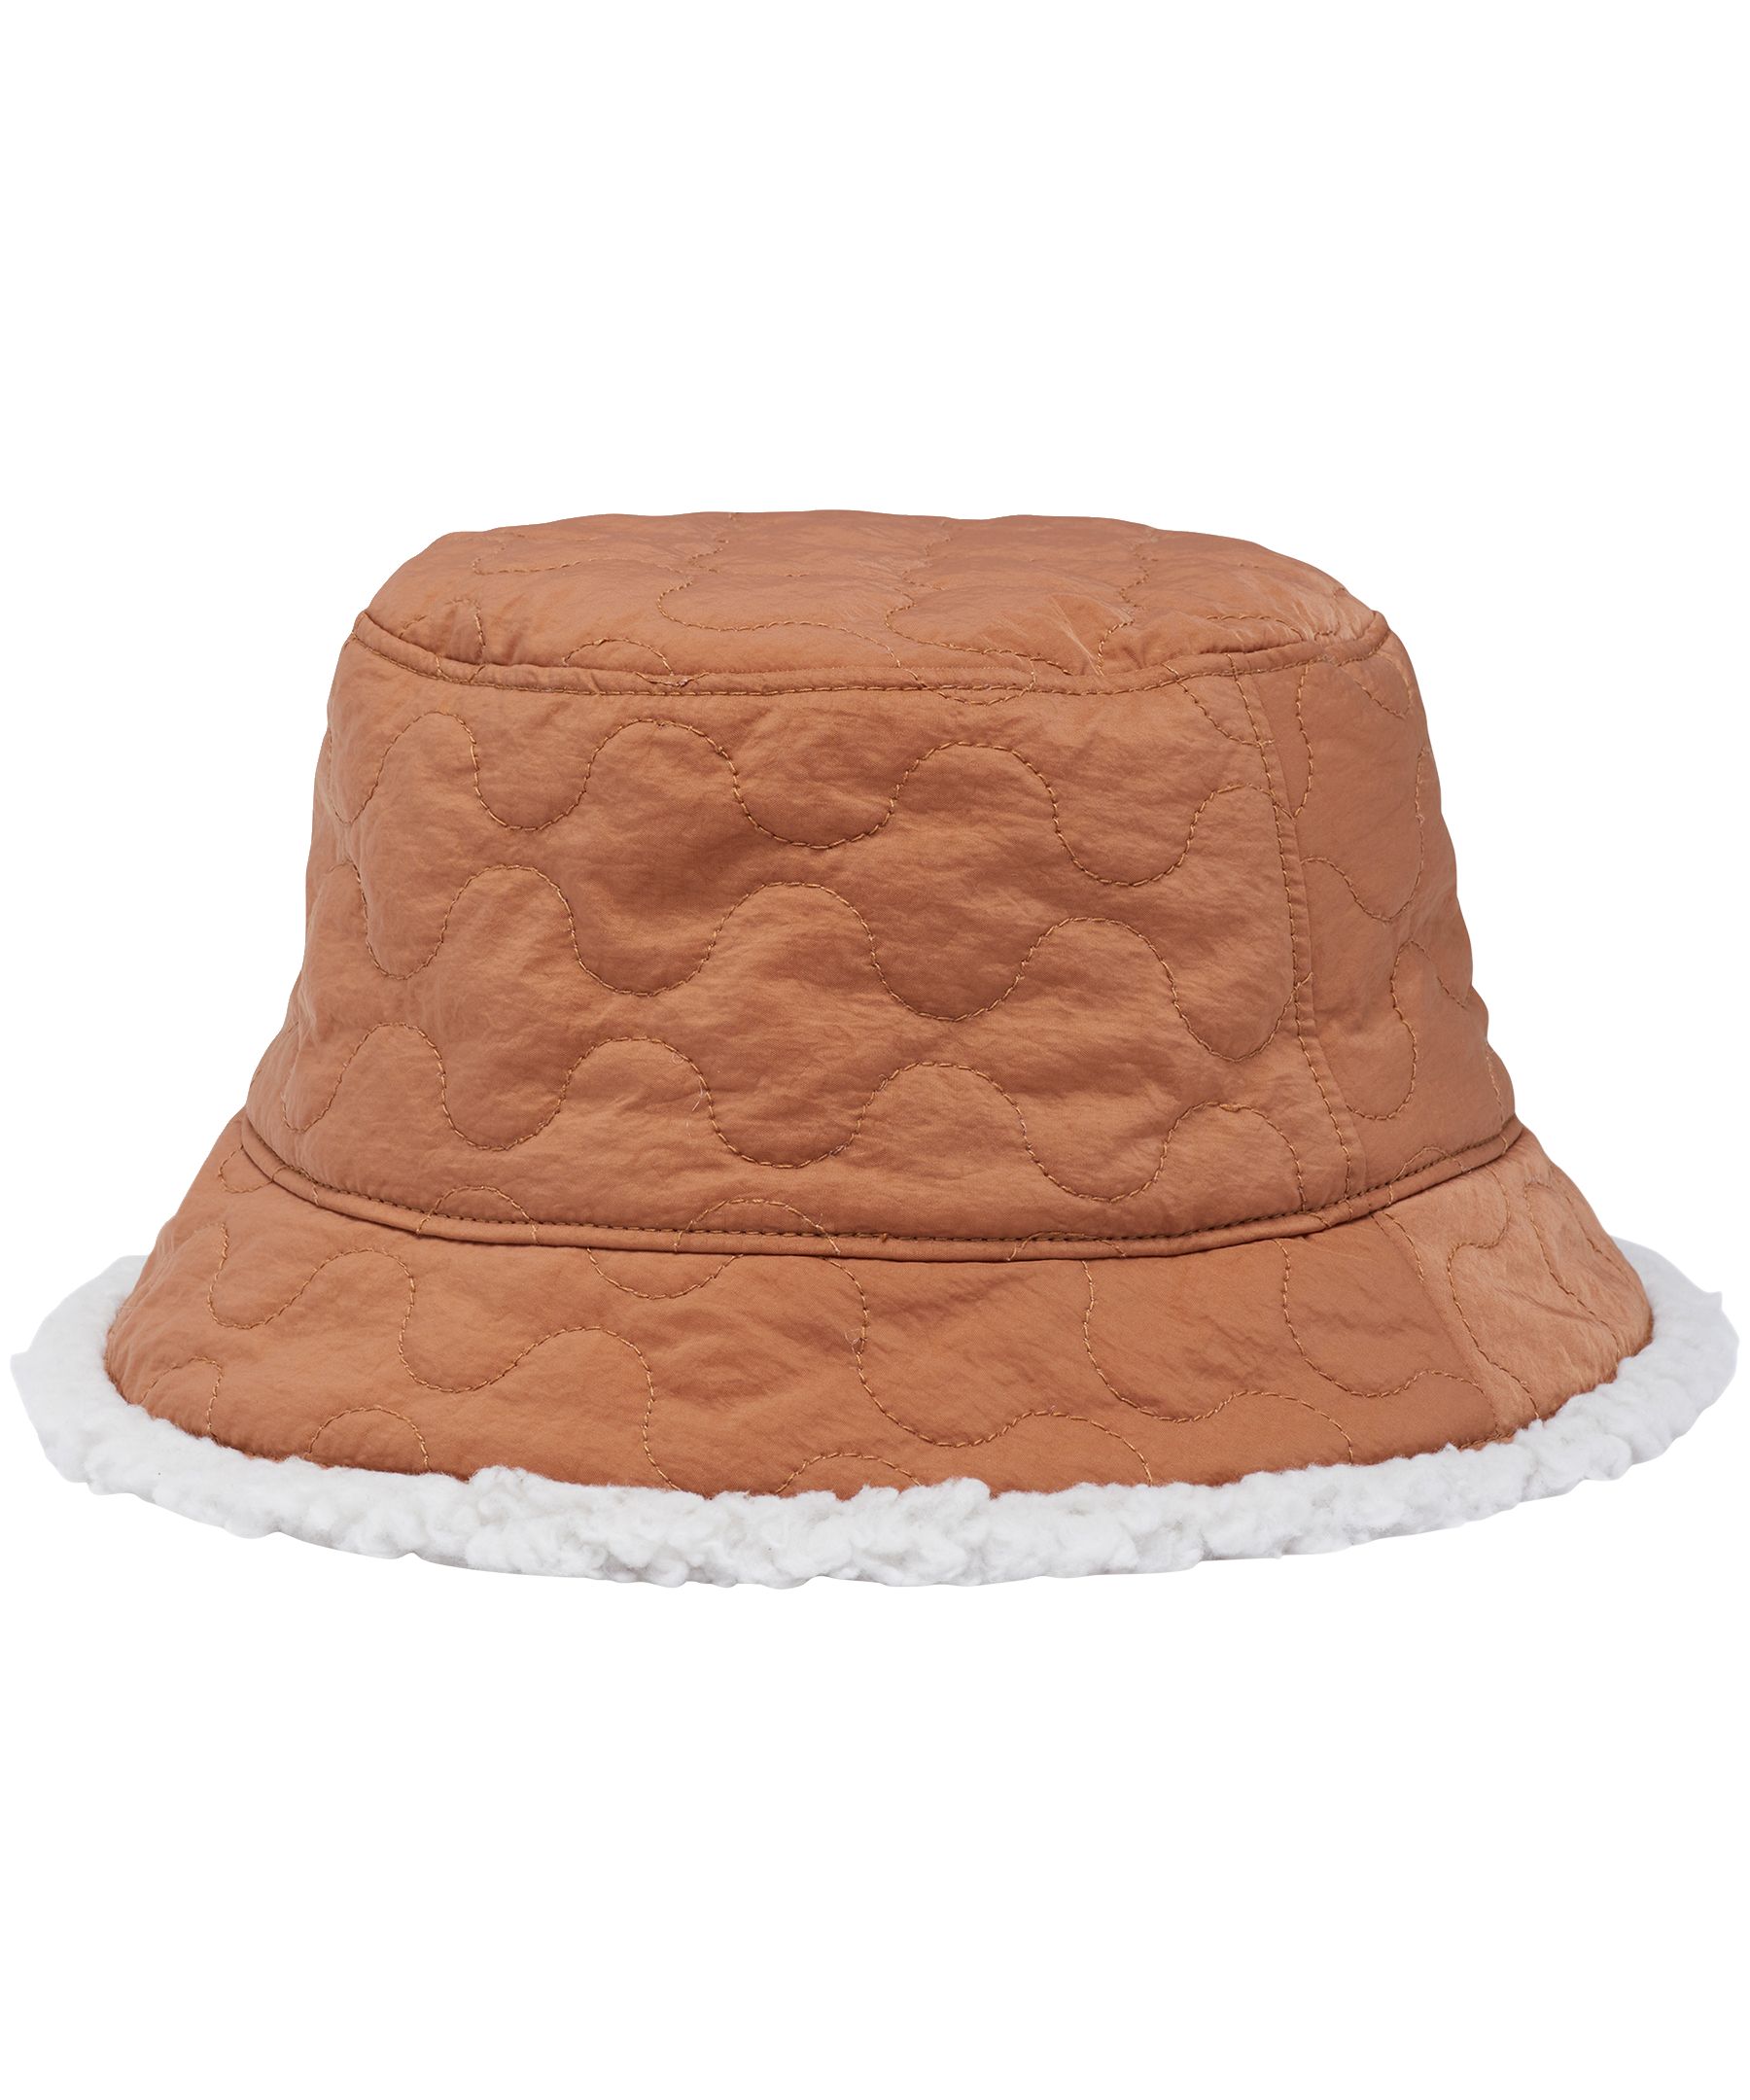 https://media-www.marks.com/product/marks-work-wearhouse/ladies-world/ladies-accessories/410037008465/columbia-winter-pass-reversible-bucket-hat-f23-c204fe77-4681-415e-8978-b2ea11138af8-jpgrendition.jpg?imdensity=1&imwidth=1244&impolicy=mZoom